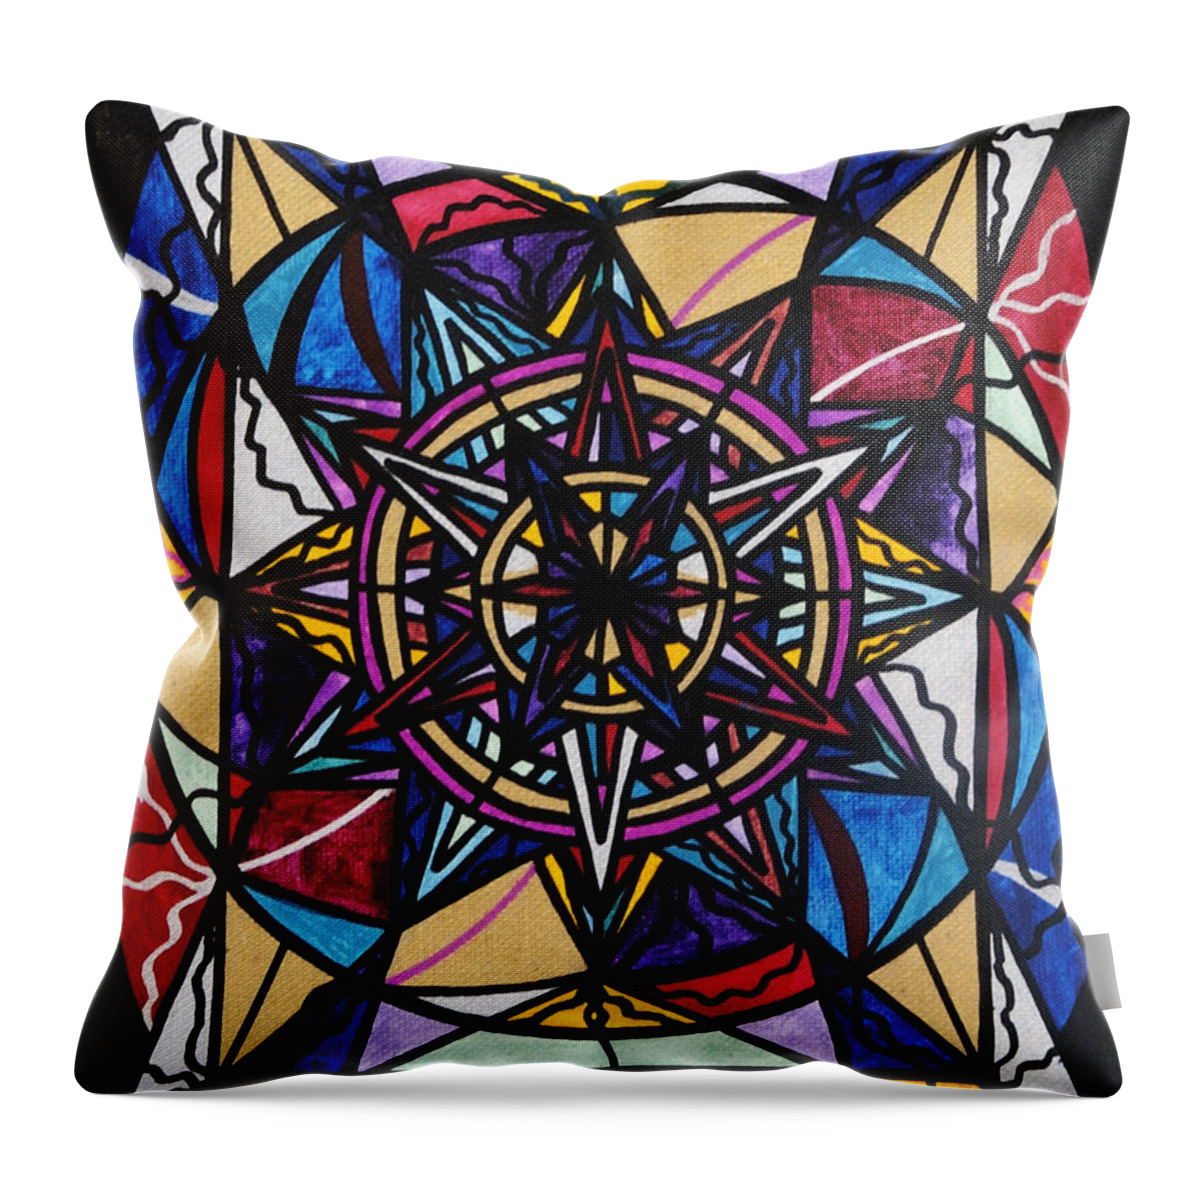 Financial Freedom Throw Pillow featuring the painting Financial Freedom by Teal Eye Print Store